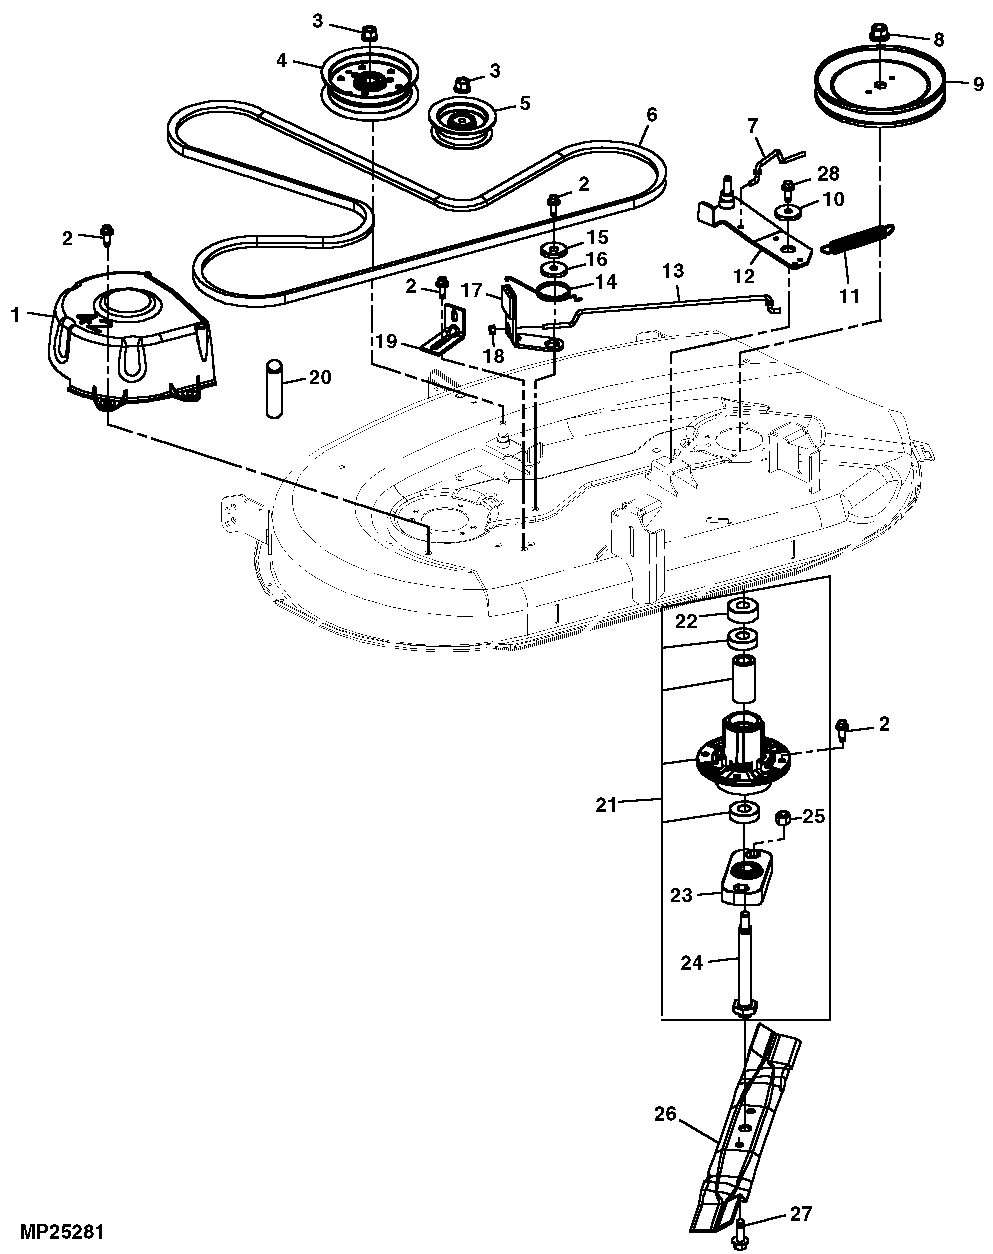 John Deere 316 Parts Diagram submited images.